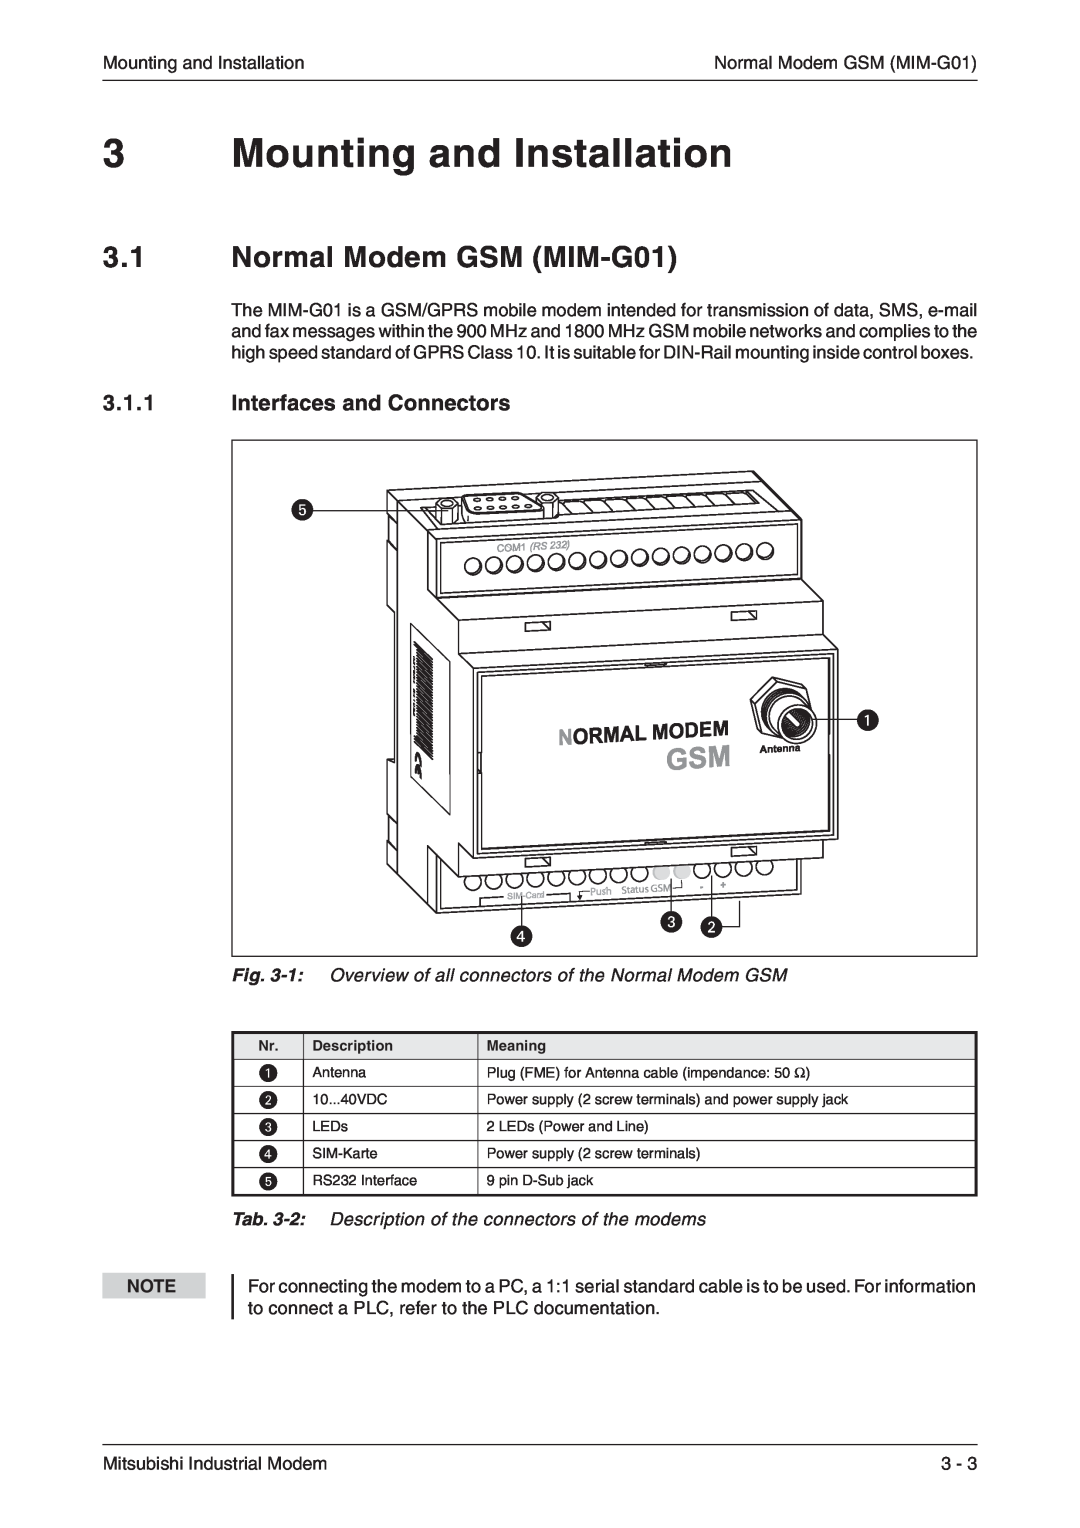 Mitsubishi Electronics Mounting and Installation, Normal Modem GSM MIM-G01, Interfaces and Connectors, Description 